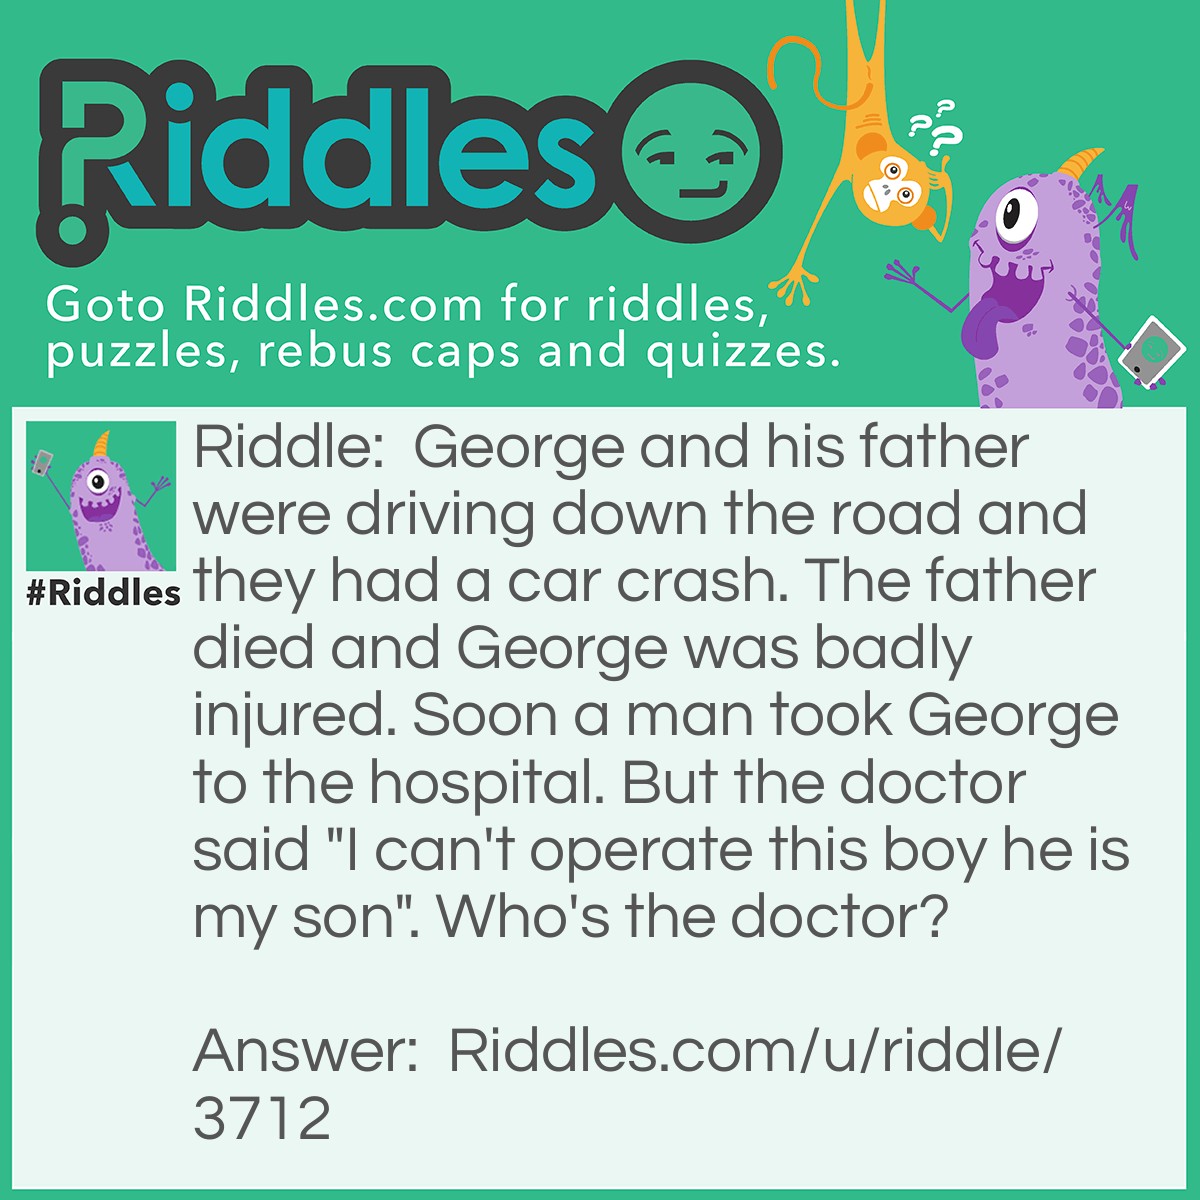 Riddle: George and his father were driving down the road and they had a car crash. The father died and George was badly injured. Soon a man took George to the hospital. But the doctor said "I can't operate this boy he is my son". Who's the doctor? Answer: The mother.